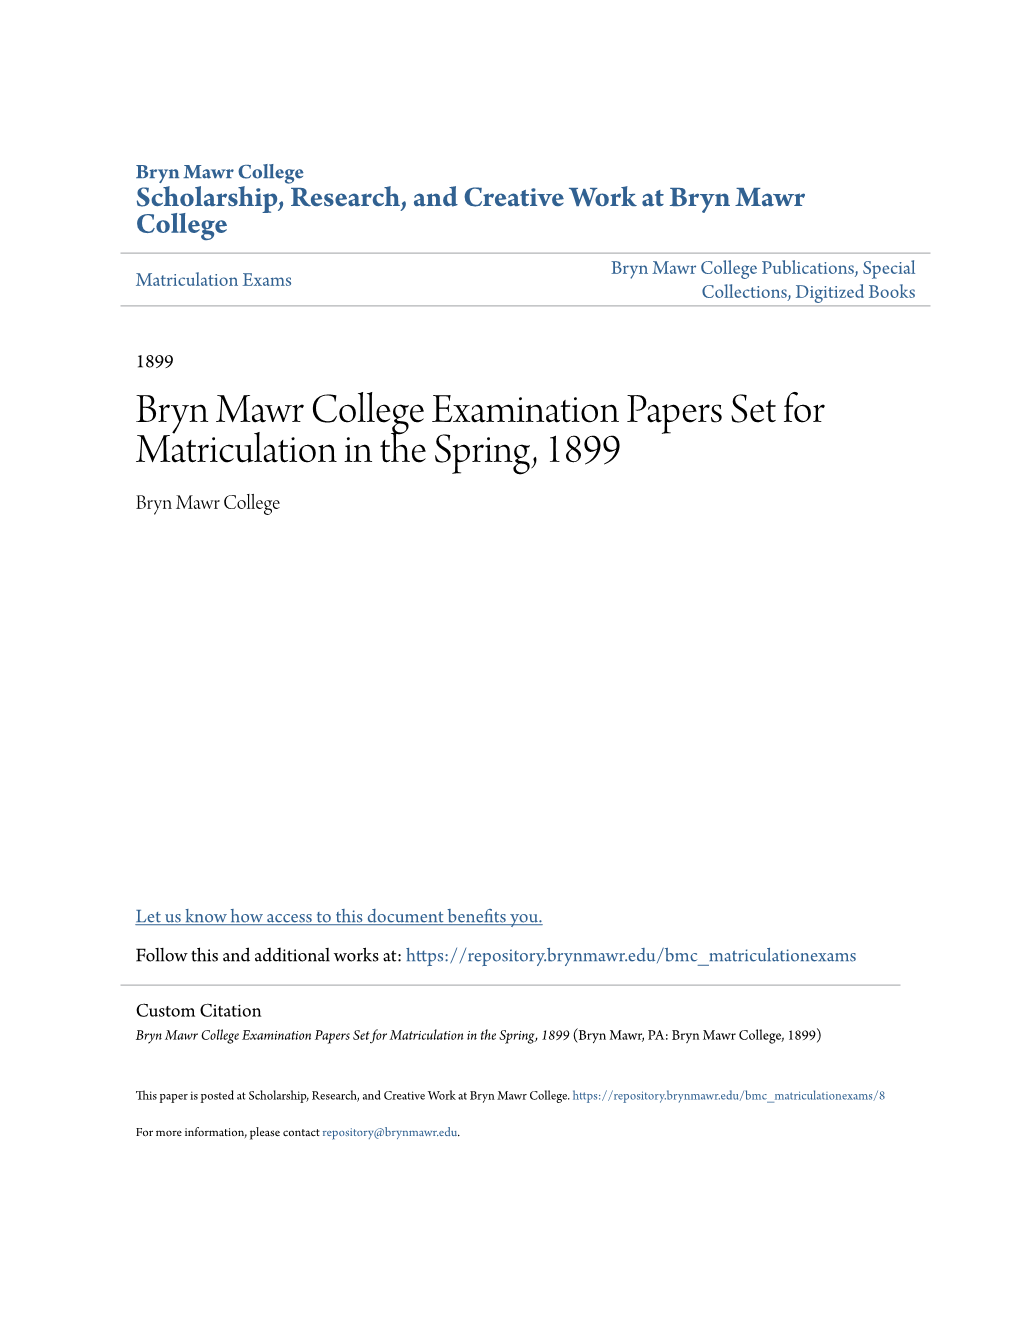 Bryn Mawr College Examination Papers Set for Matriculation in the Spring, 1899 Bryn Mawr College